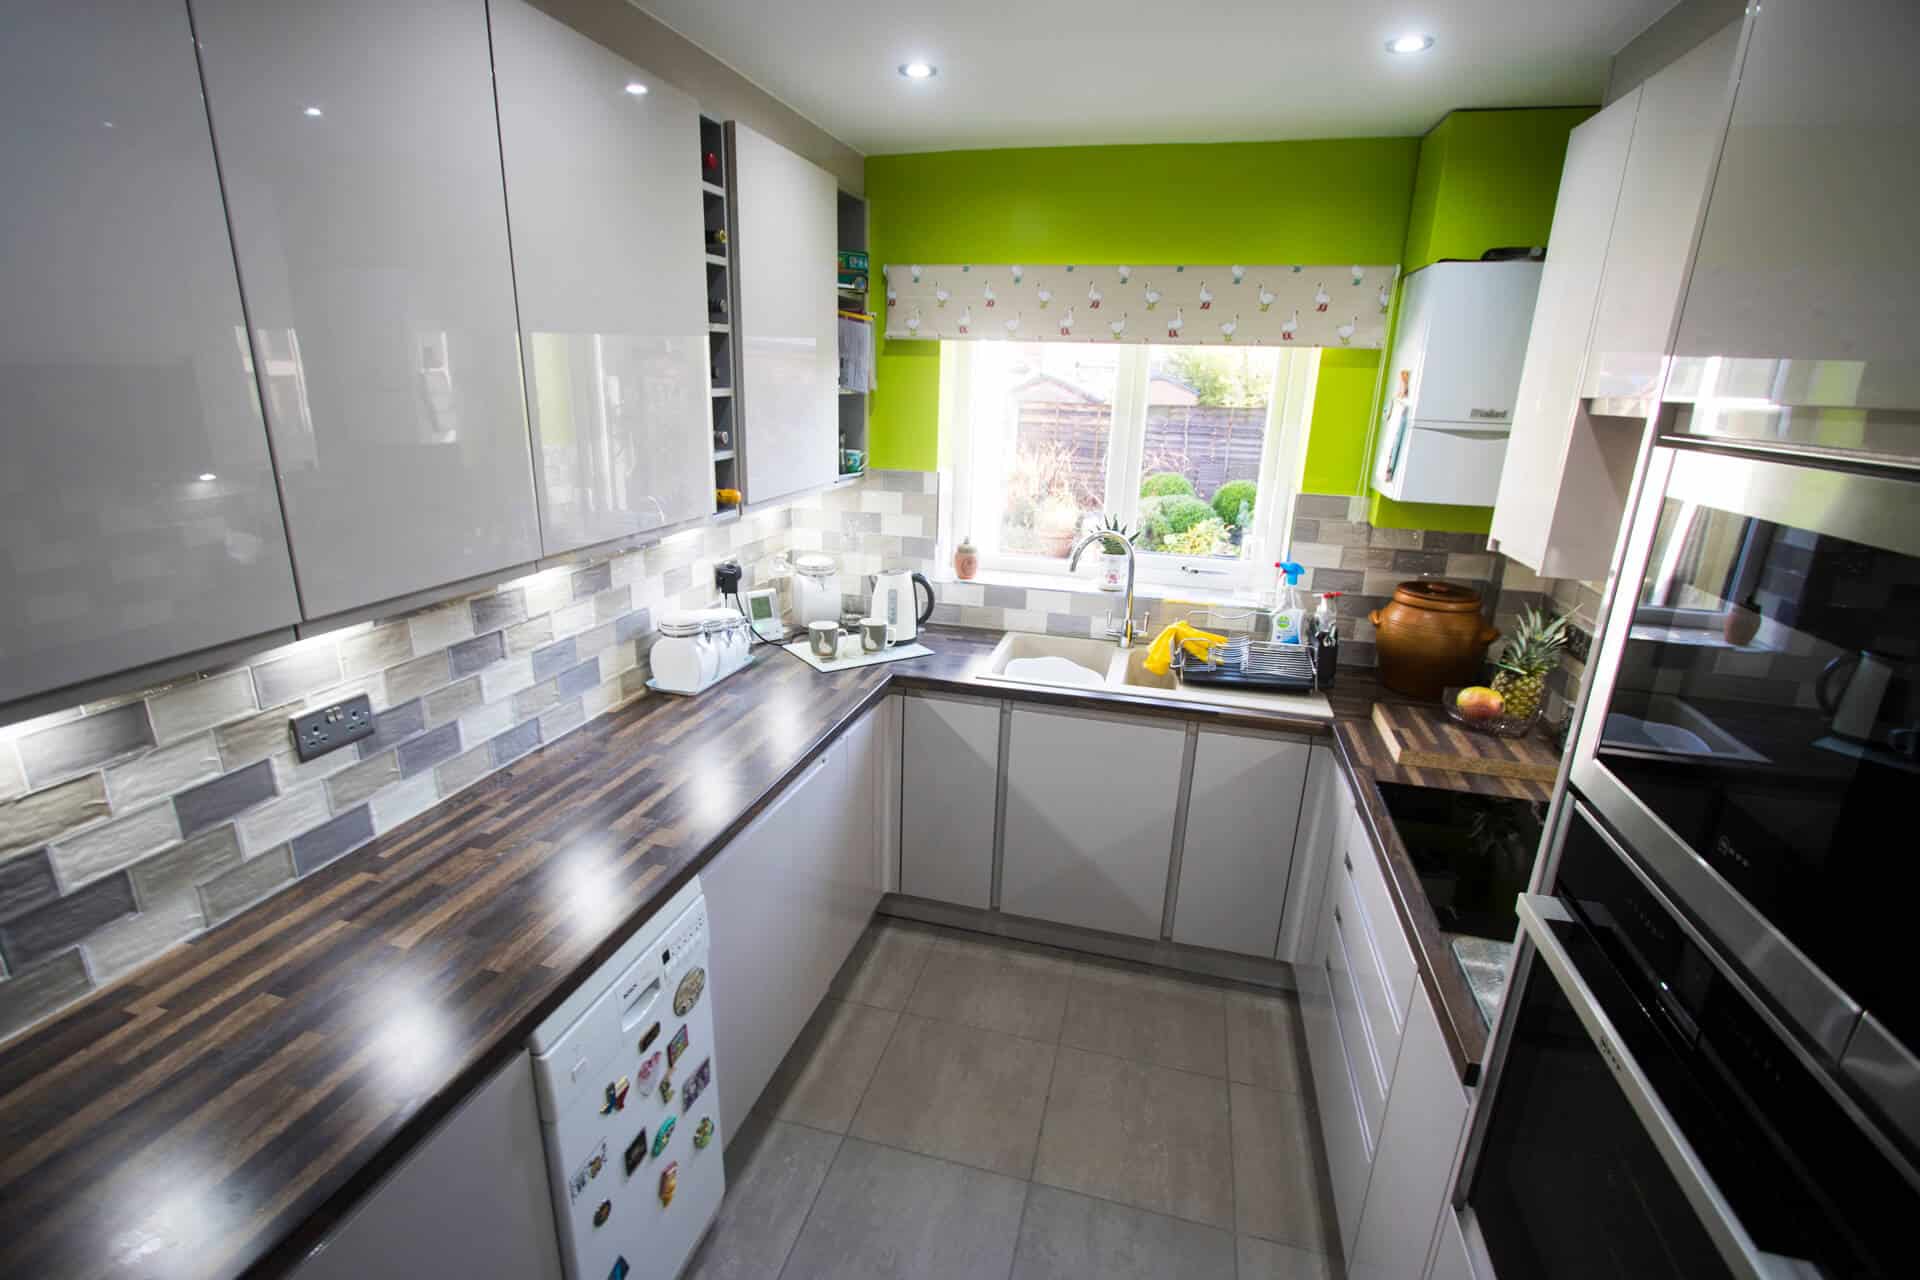 Kitchens Bolton - Fitted & Design Service | Ramsbottom Kitchens